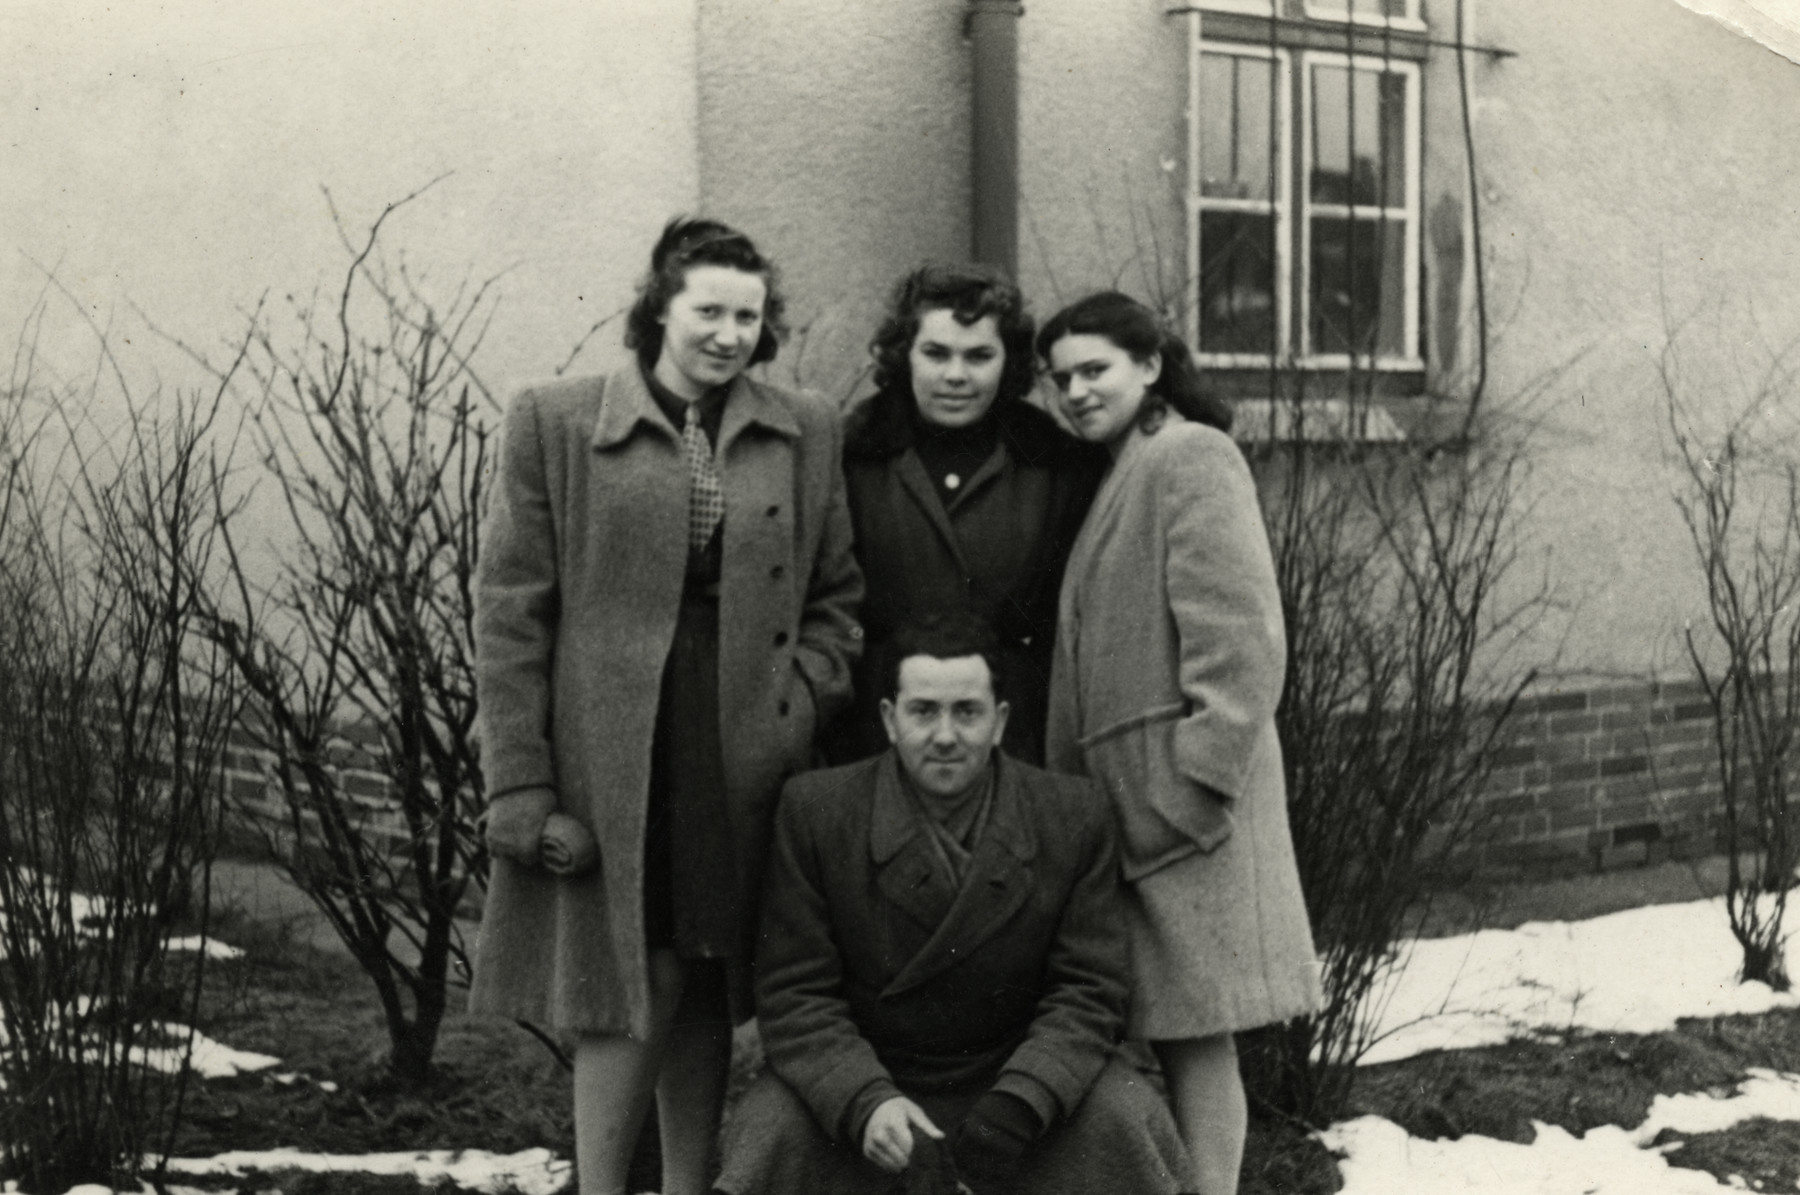 Friends pose in front of a building in the Bergen-Belsen displaced persons' camp. 

Pictured are Lili Deutsch (top left) wearing a coat made from a blanket, her sister Esther, and friend Leib (bottom).